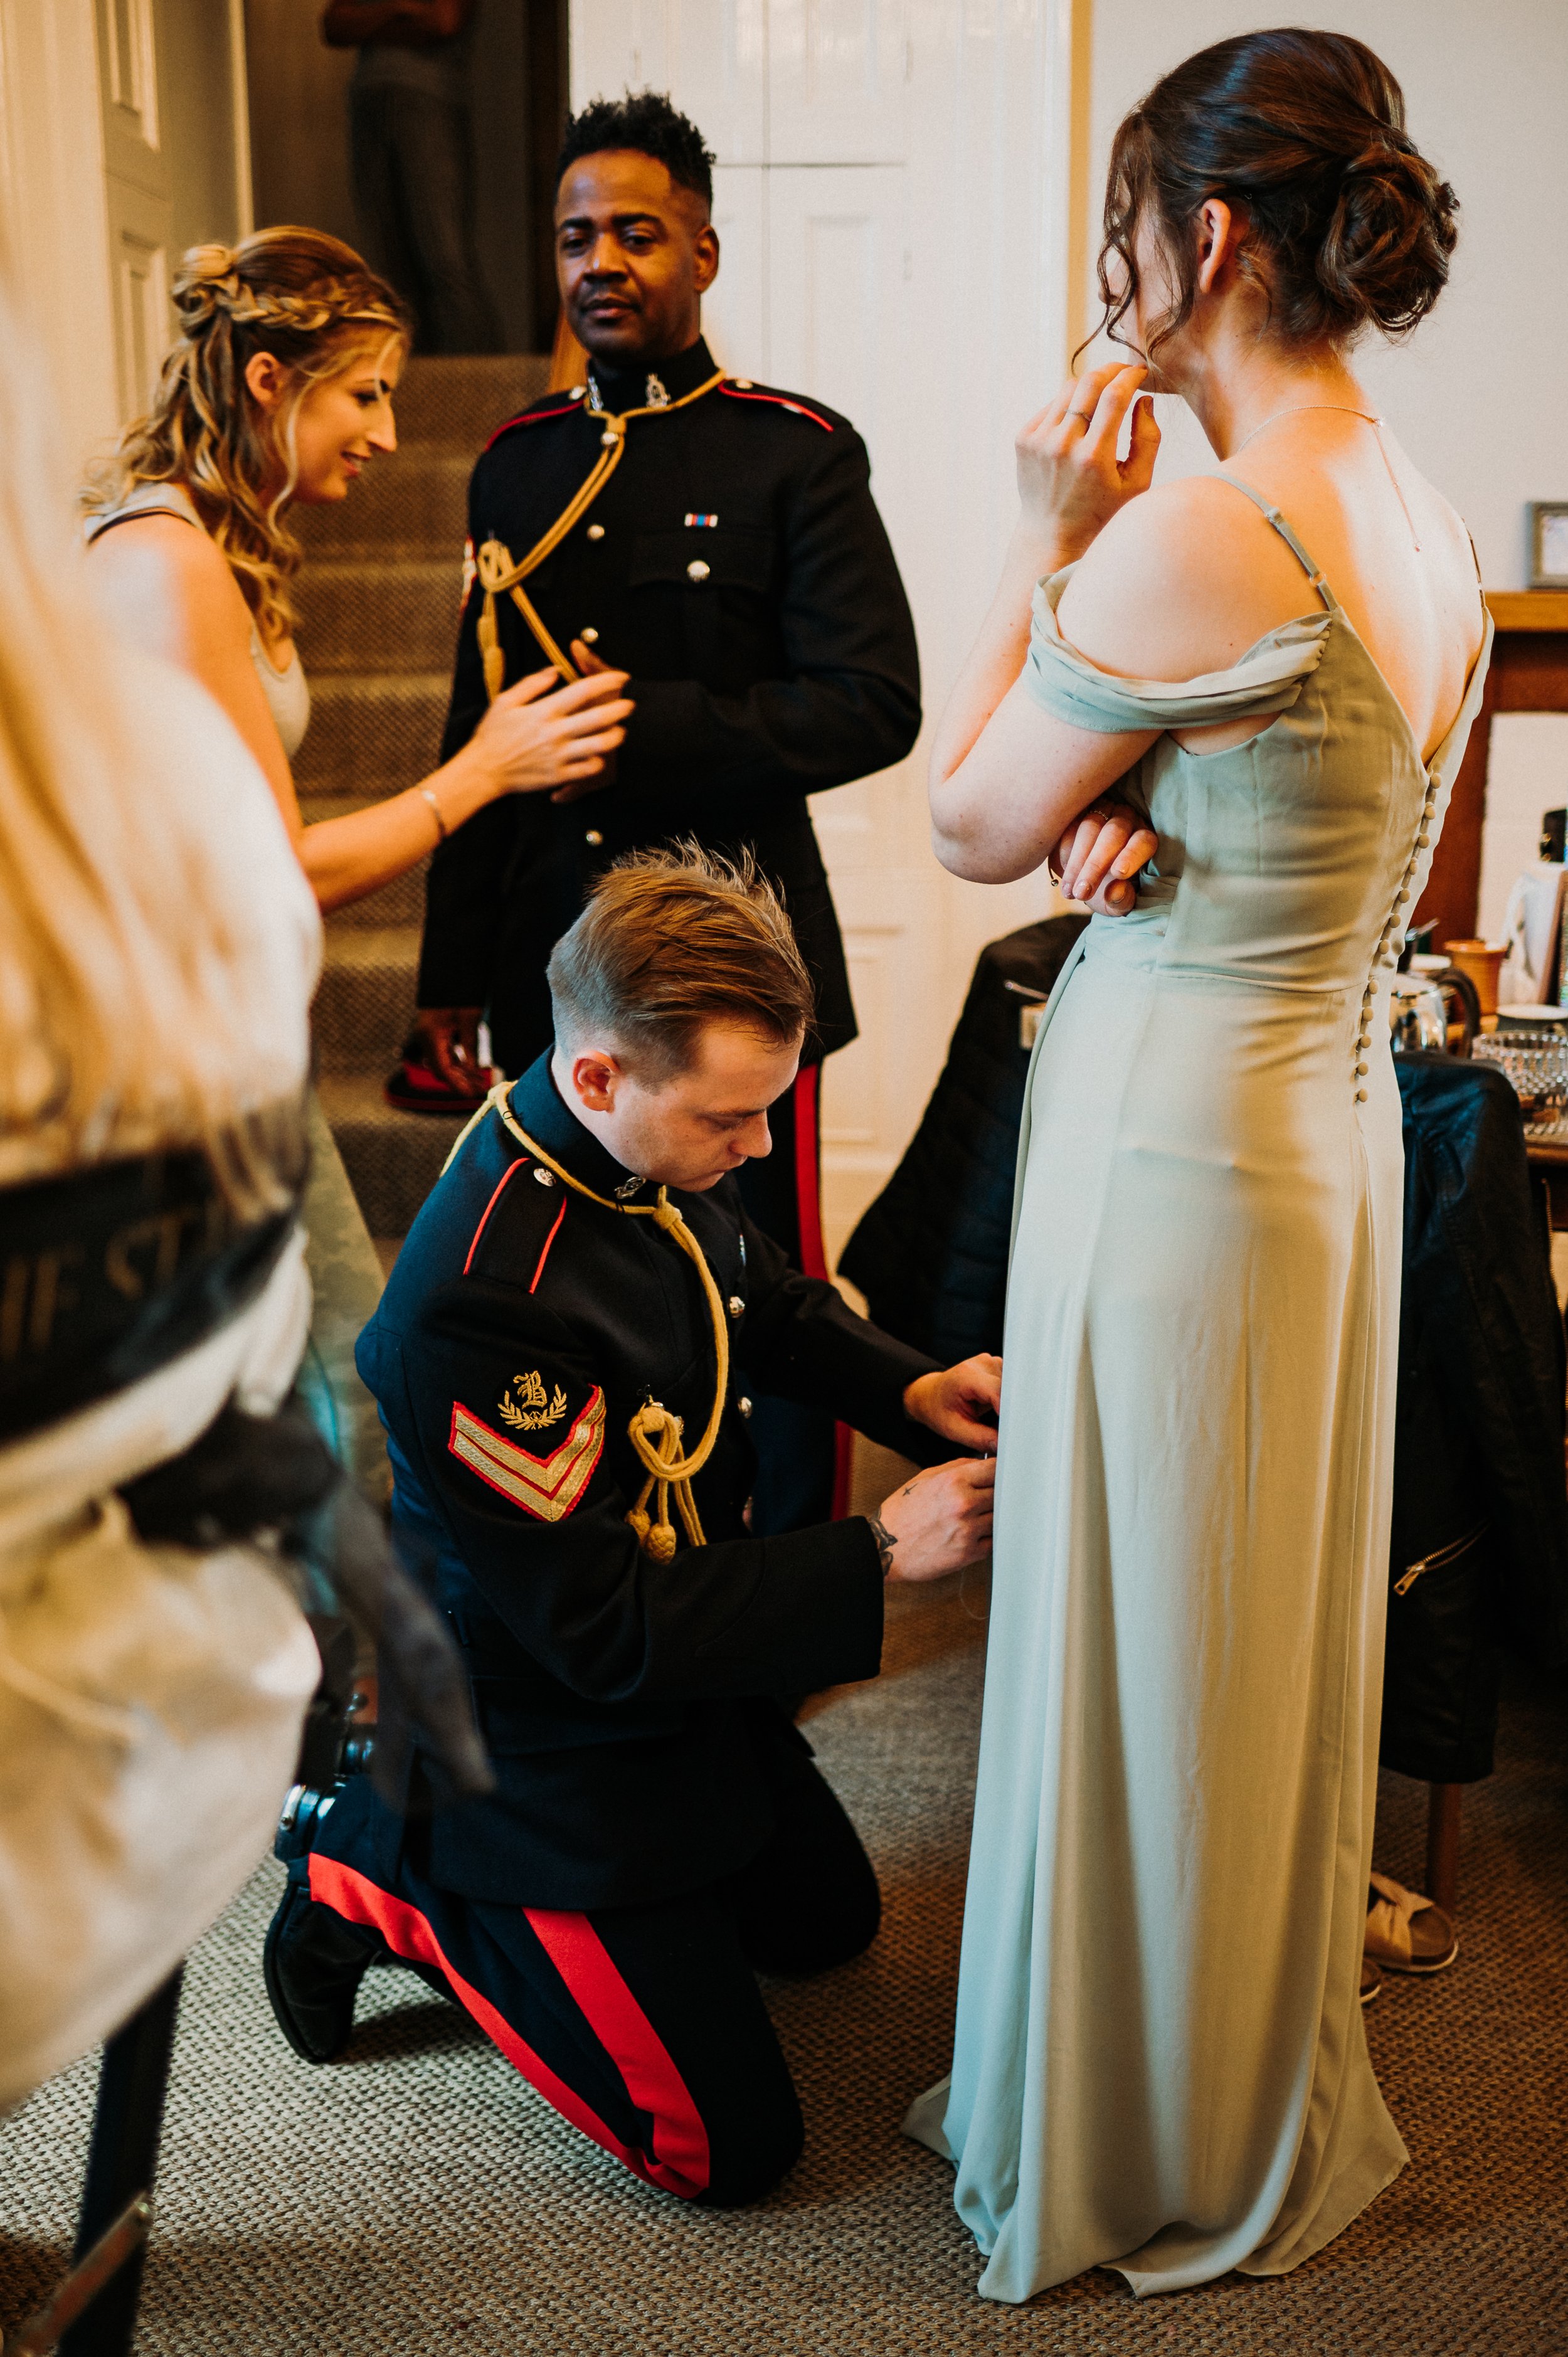 One of the groom's sword guard helps a bridesmaid to repair her dress on the morning of the wedding.